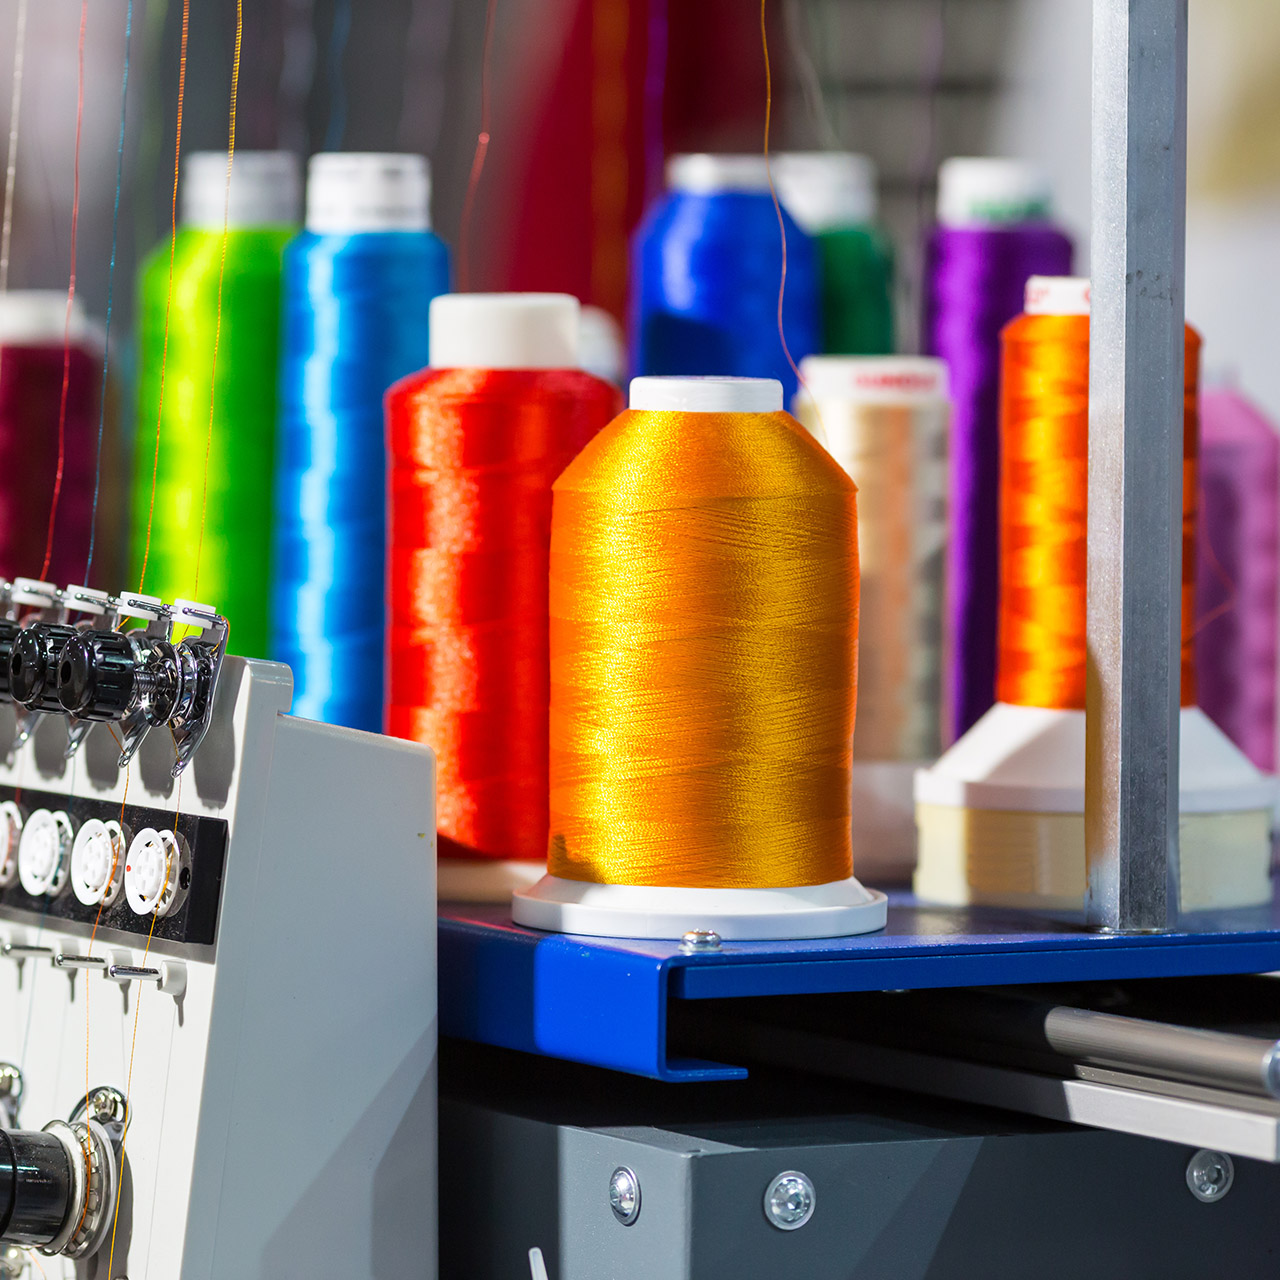 monitoring KPIs in textile manufacturing with MES